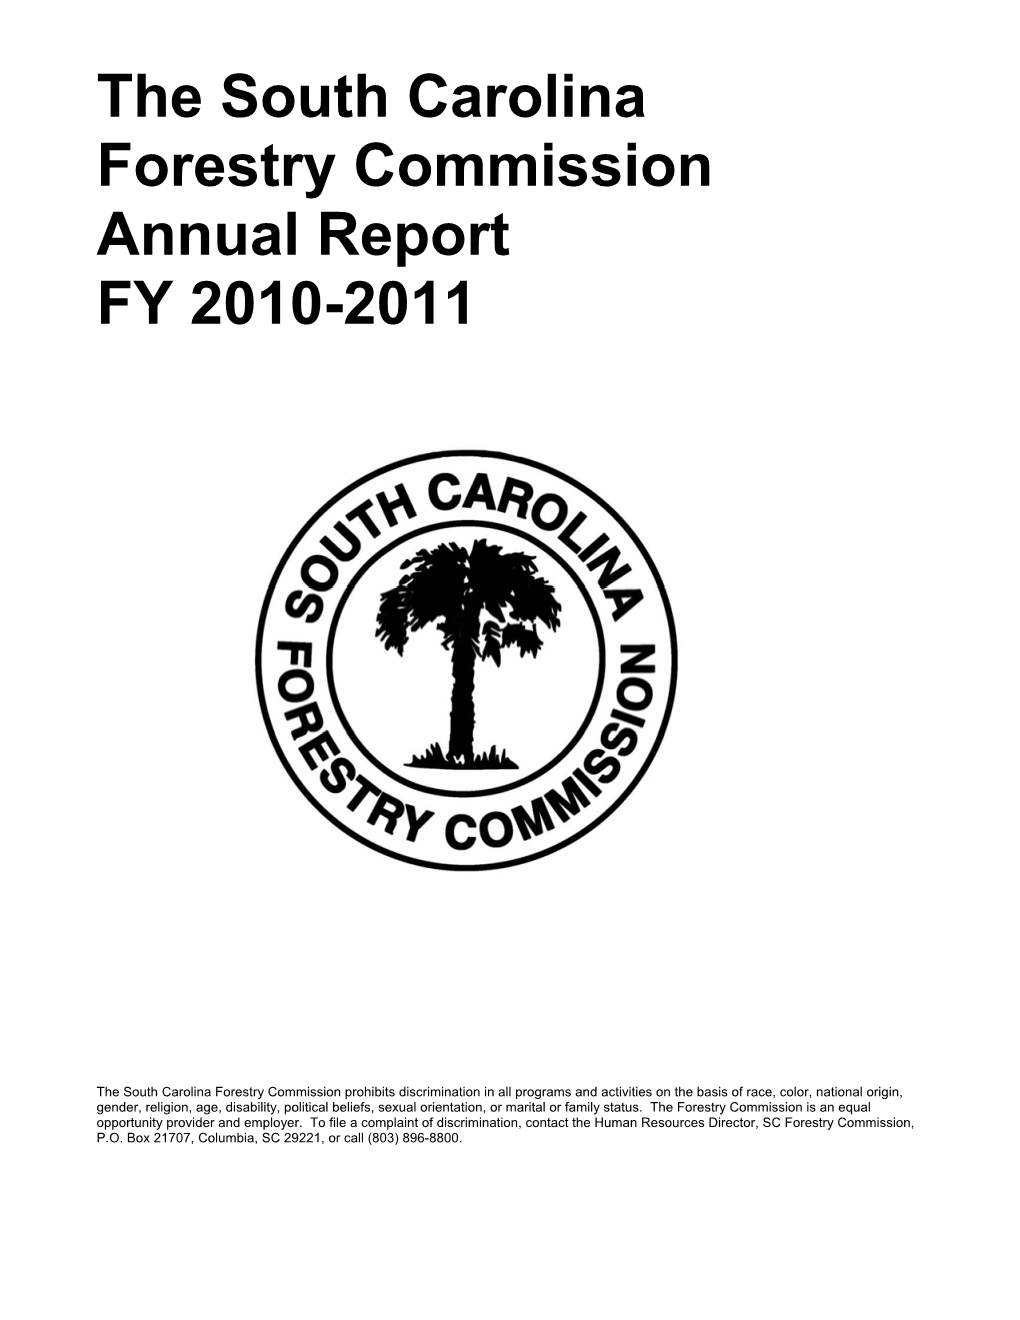 The South Carolina Forestry Commission Annual Report FY 2010-2011